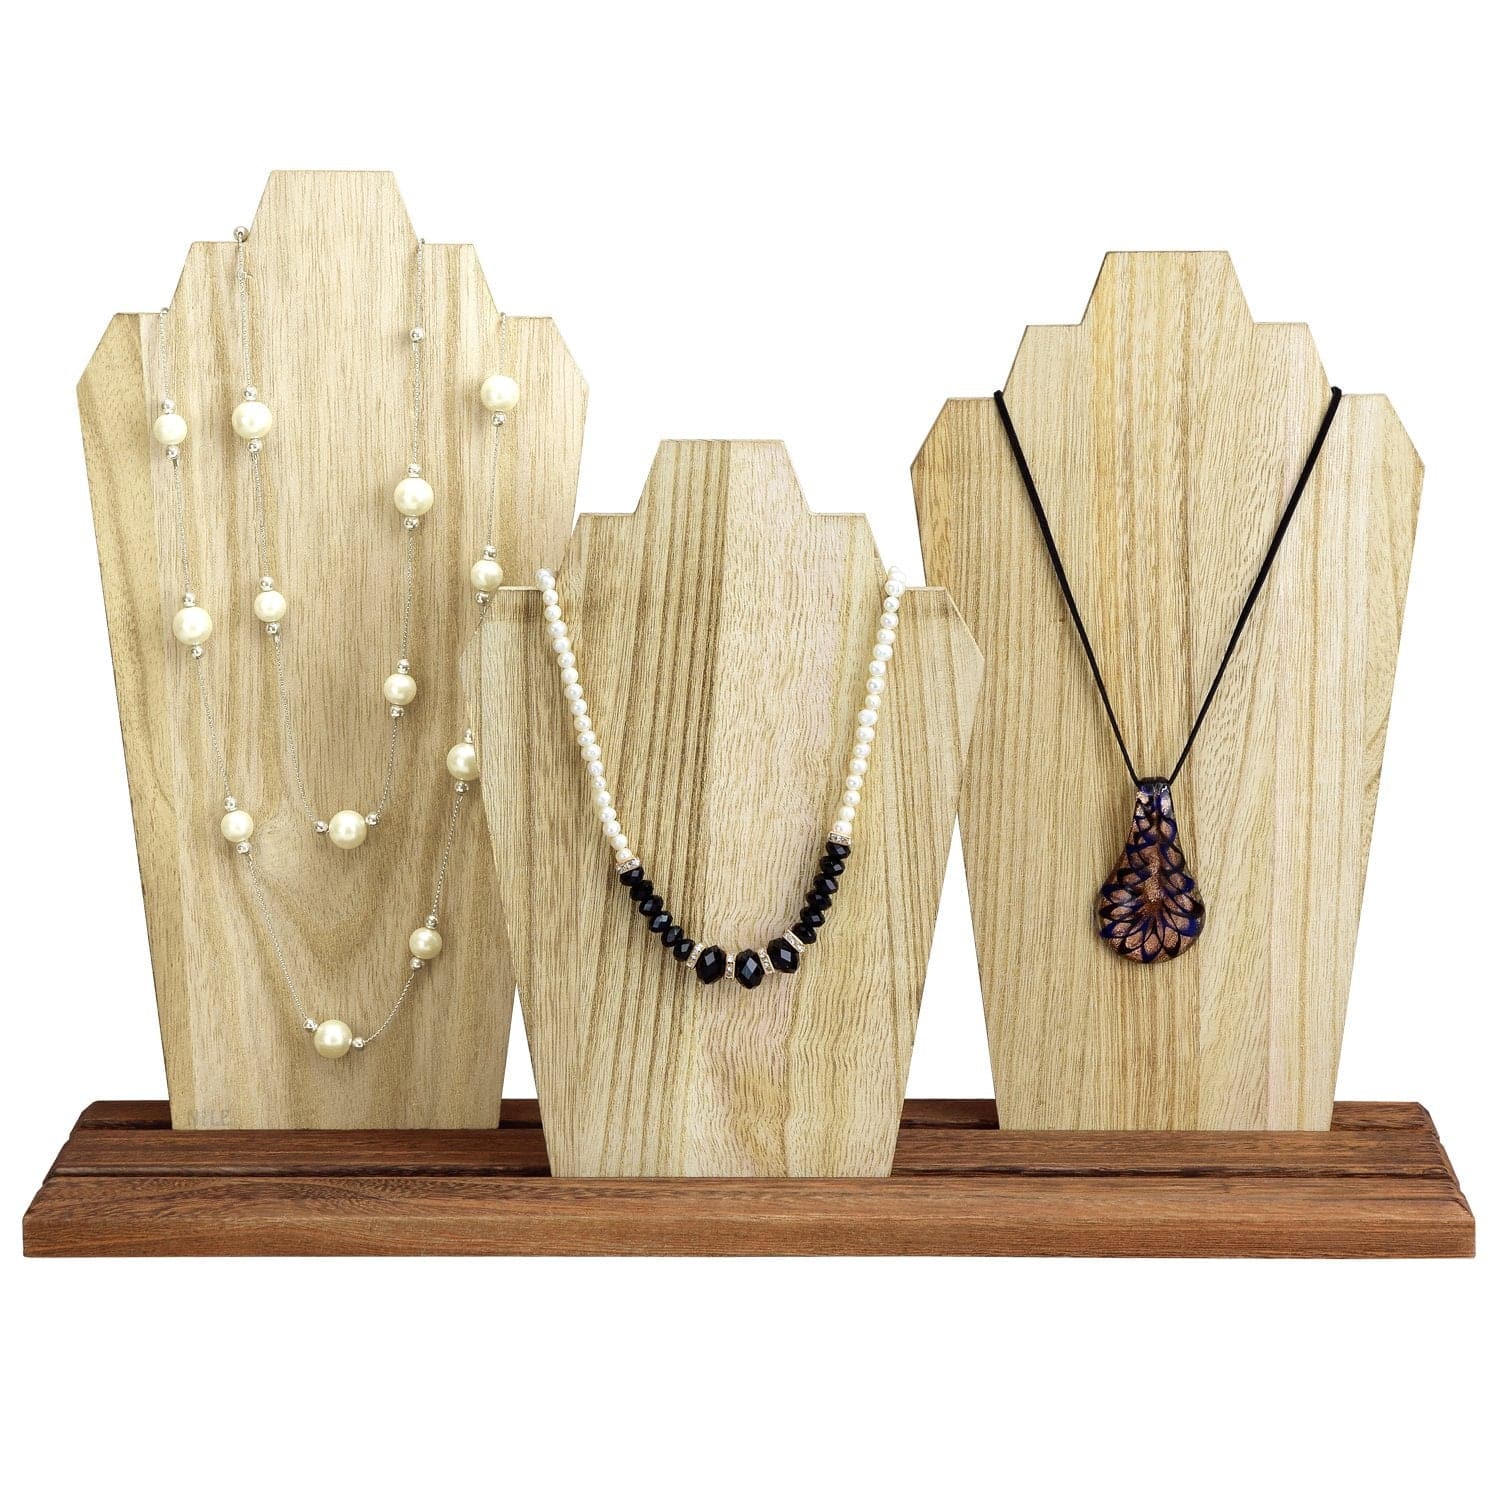 Wooden Slotted Pin Display